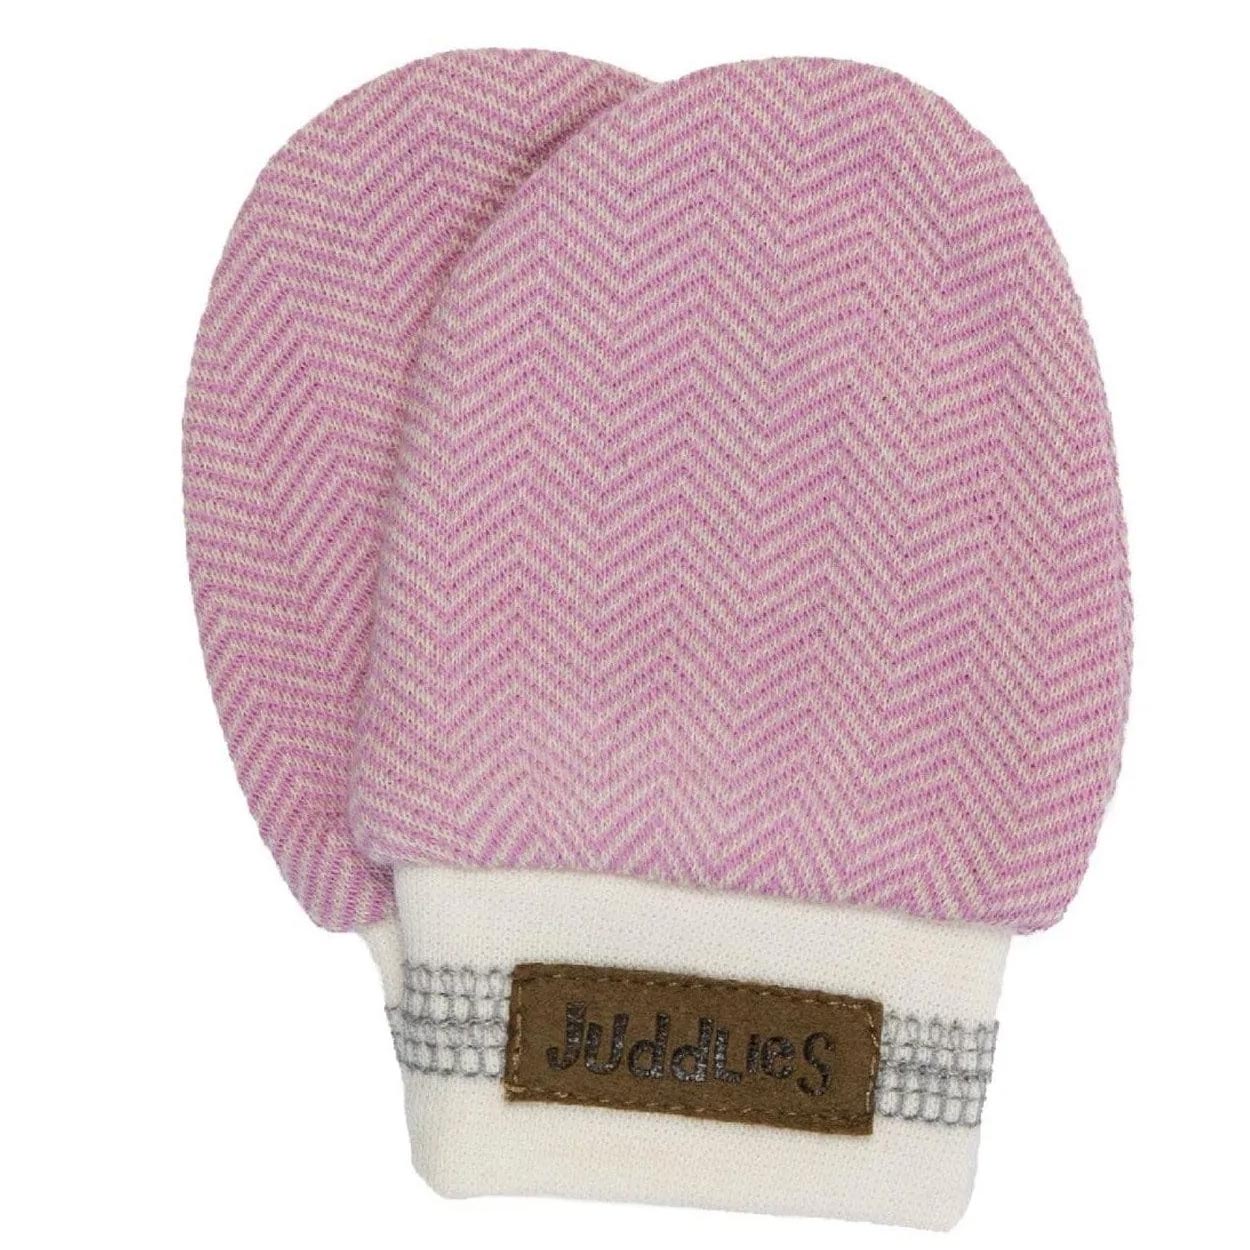 Juddlies Designs Cottage Collection Mitts help protect baby from scratches and also keep tiny hands warm and cosy.